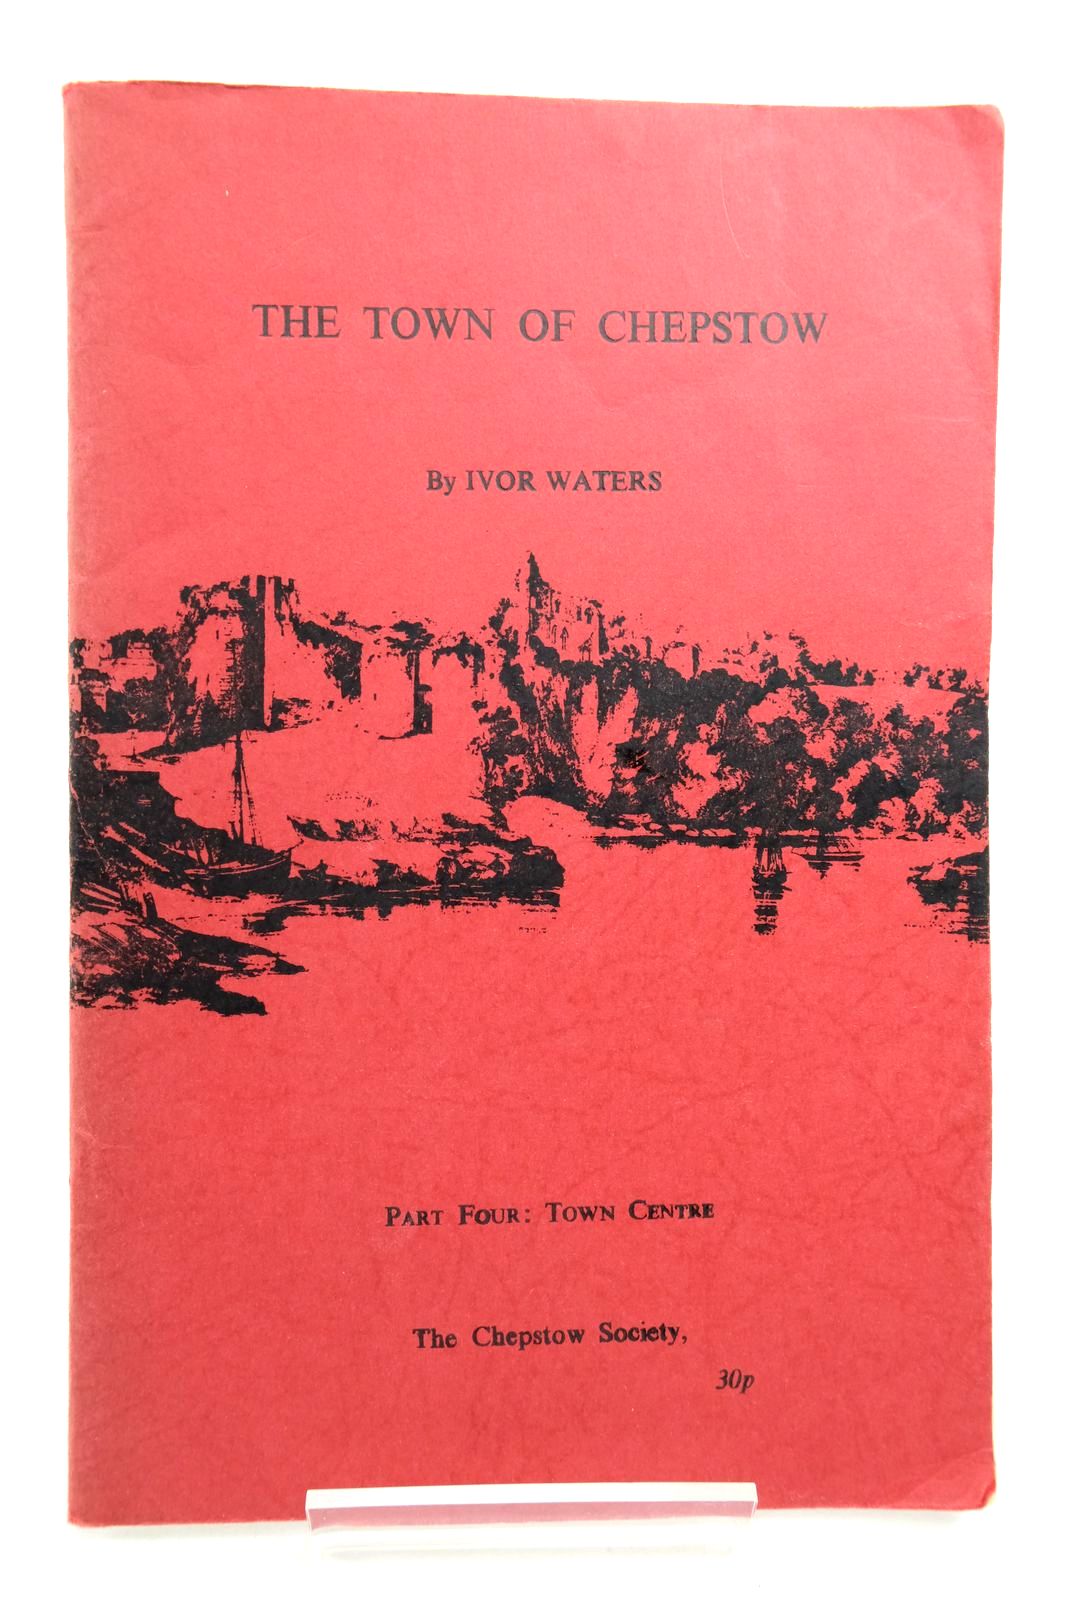 Photo of THE TOWN OF CHEPSTOW PART 4 written by Waters, Ivor illustrated by Waters, Mercedes published by The Chepstow Society (STOCK CODE: 2140404)  for sale by Stella & Rose's Books